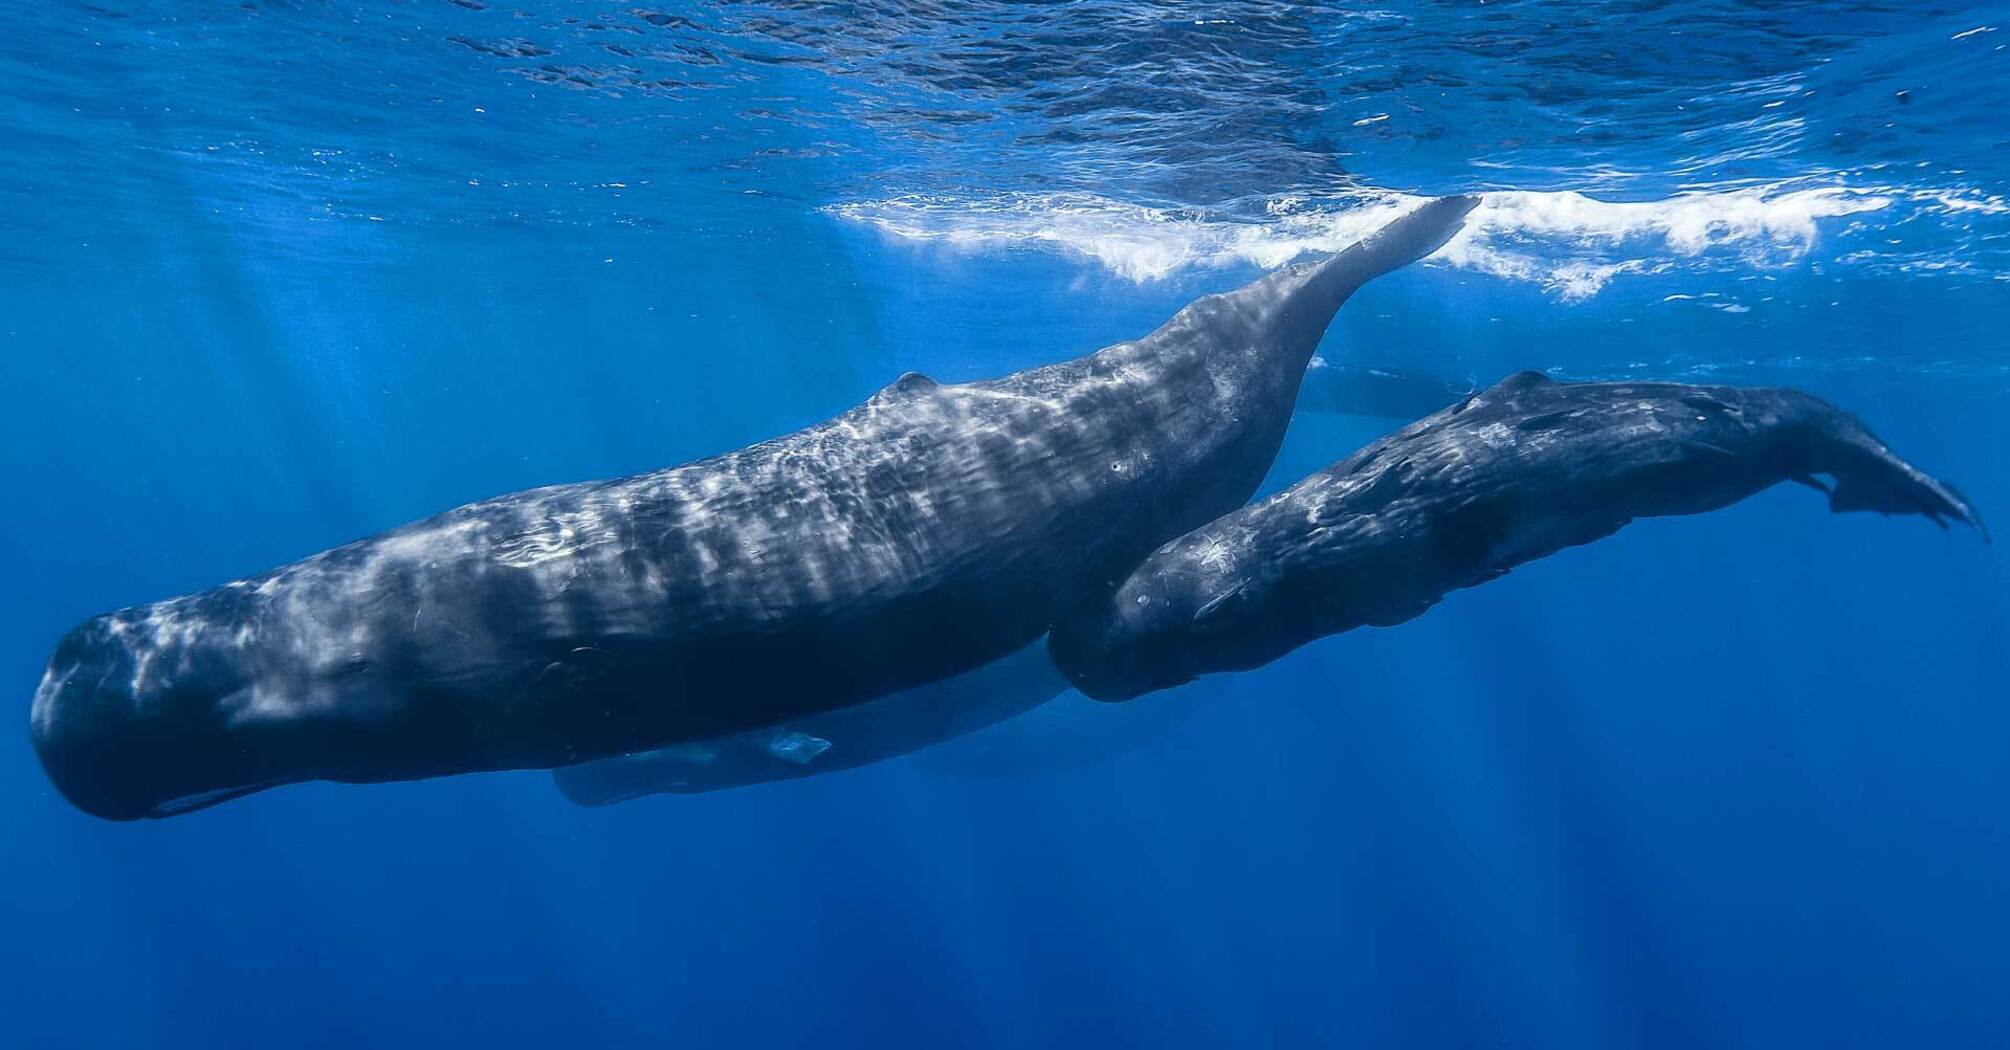 Sperm whales are highly organized, social beings capable of making collective decisions